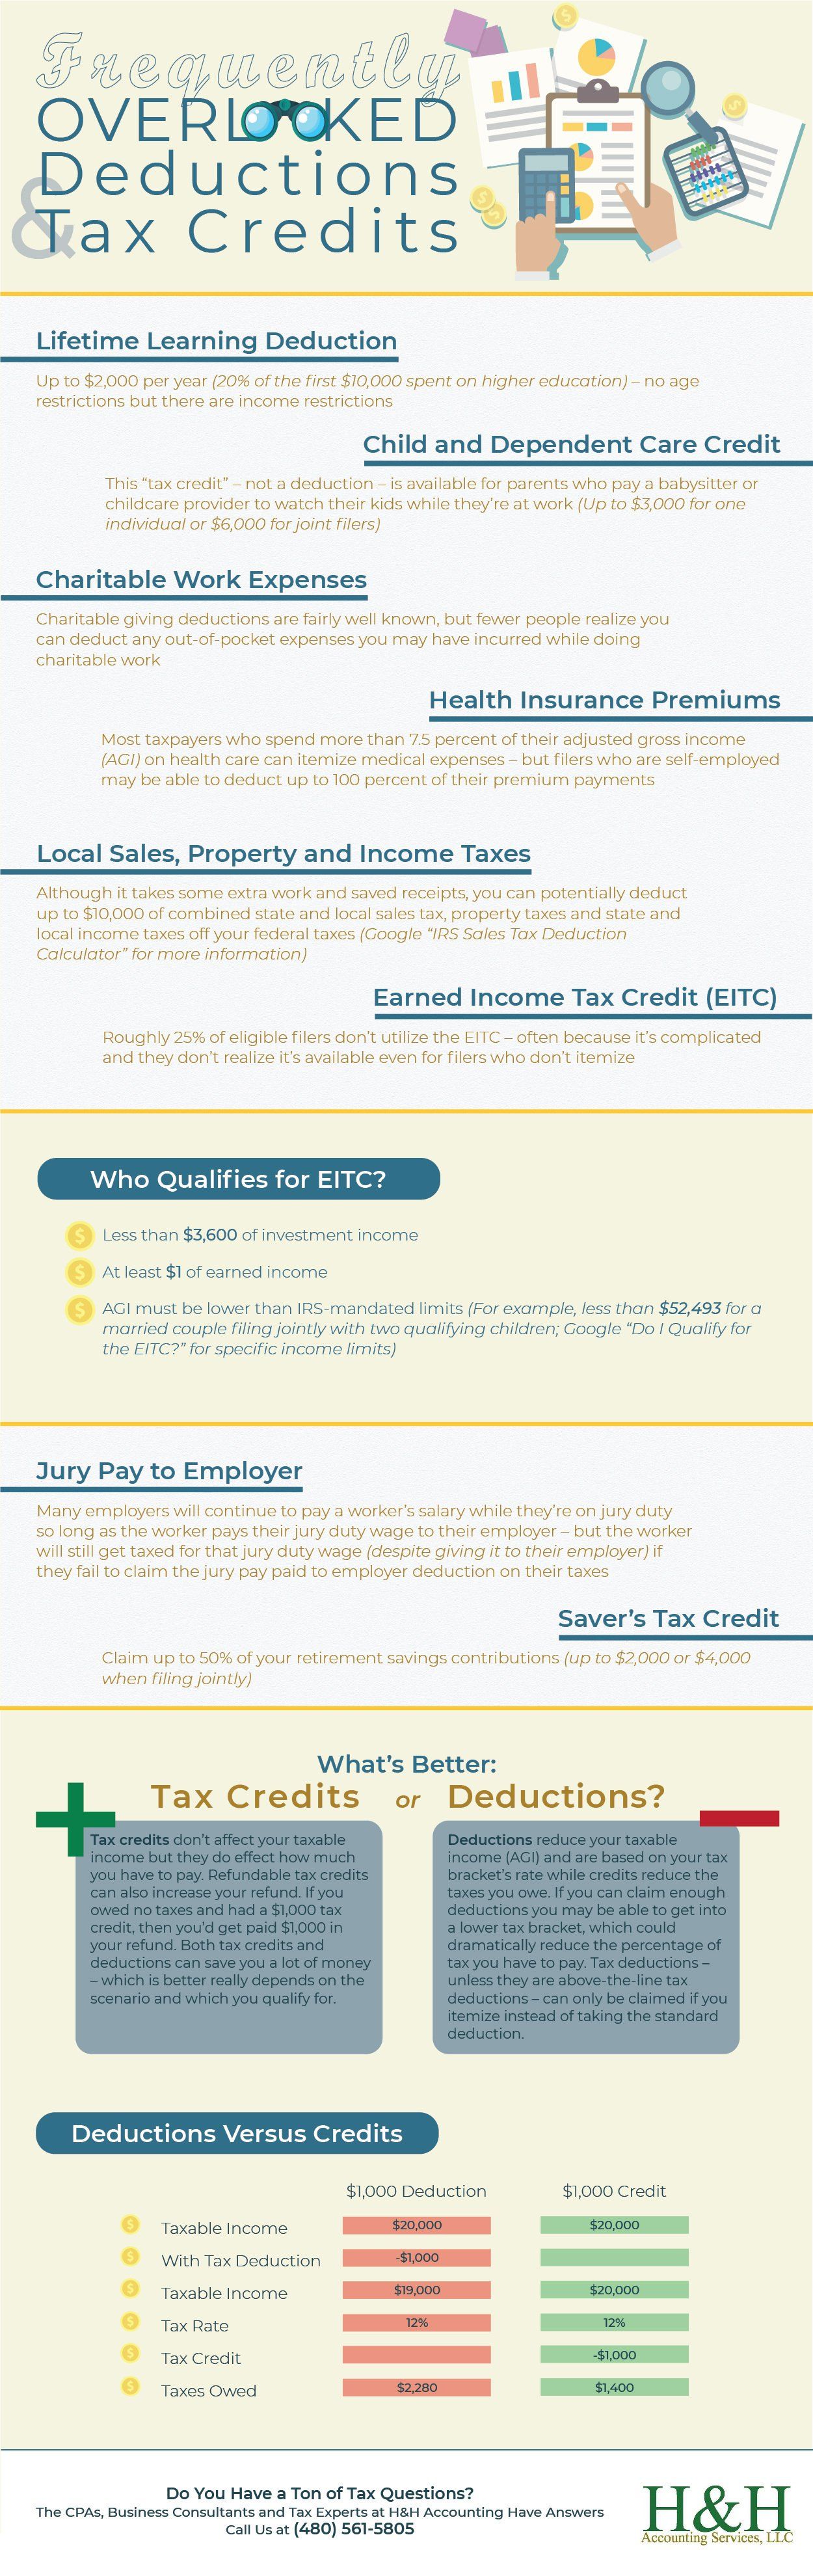 tax deduction and tax credit infographic